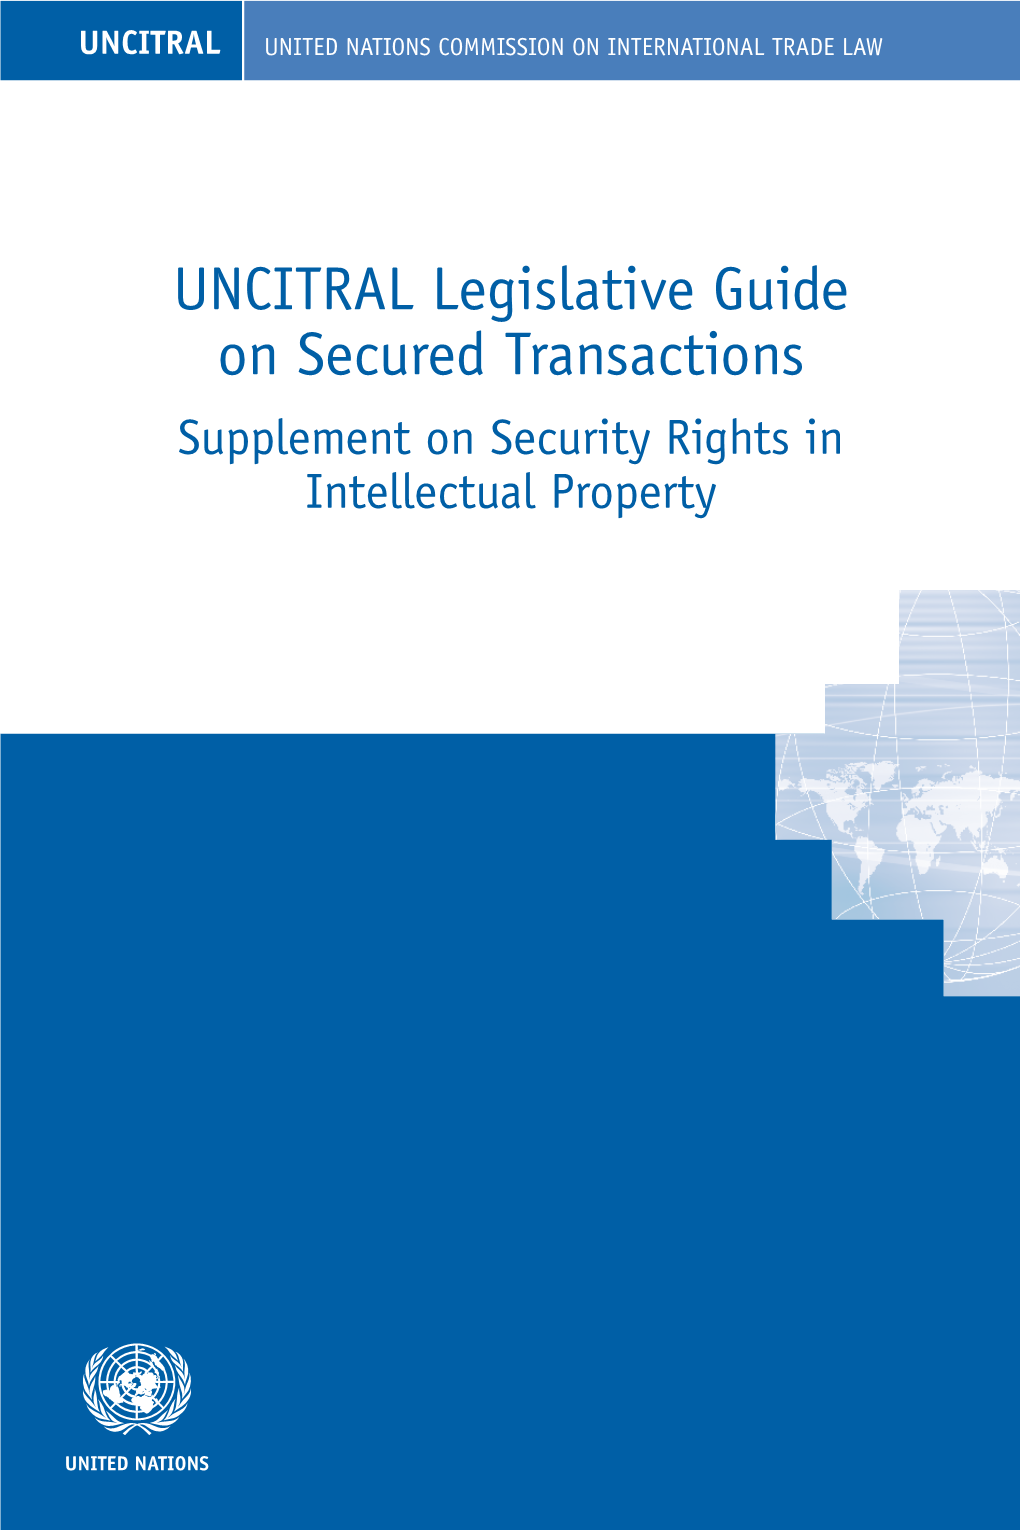 UNCITRAL Legislative Guide on Secured Transactions Supplement on Security Rights in Intellectual Property